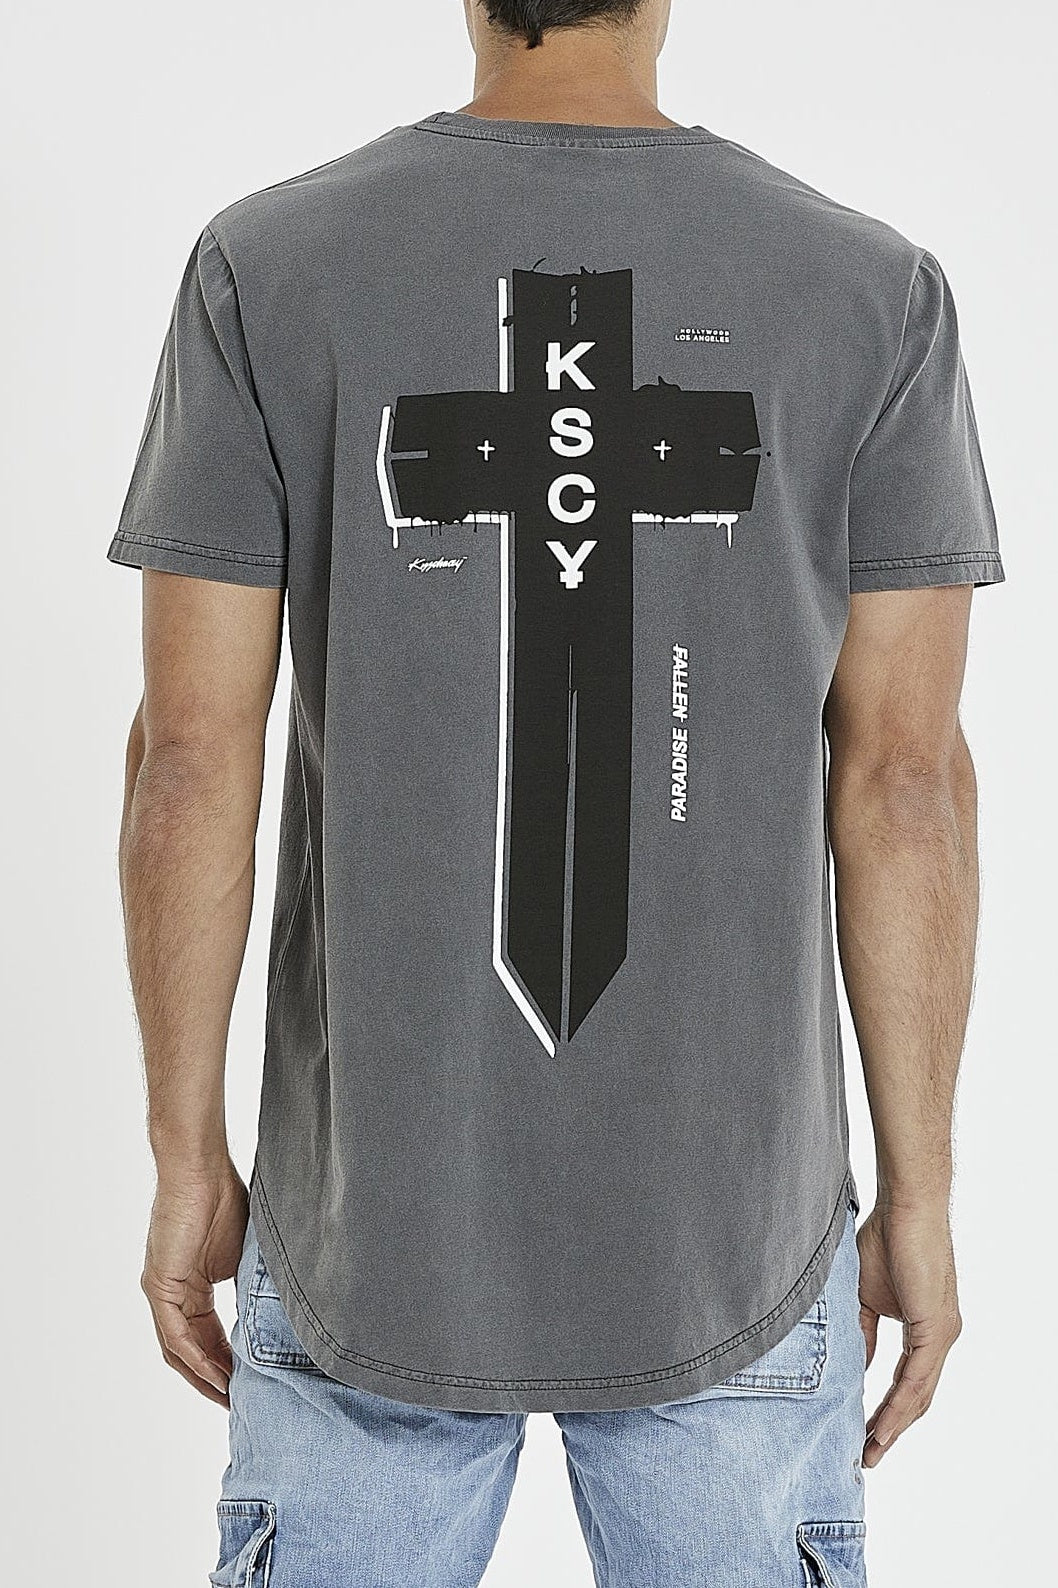 KISS CHACEY Mens Hollywood Dual Curved Hem Tee - Pigment